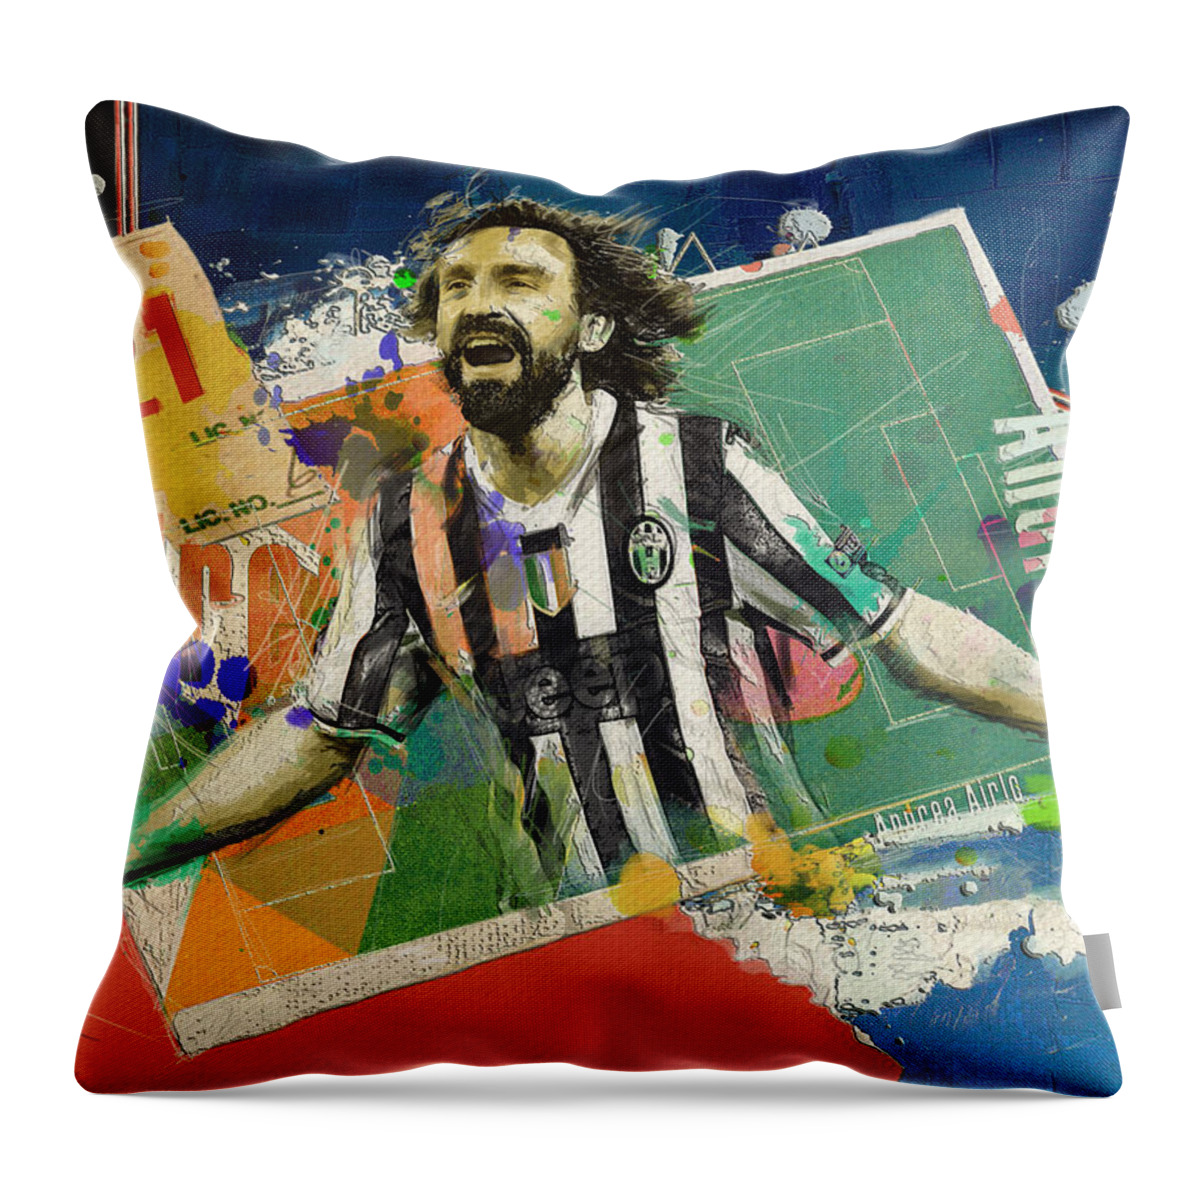 Andrea Pirlo Throw Pillow featuring the painting Andrea Pirlo by Corporate Art Task Force